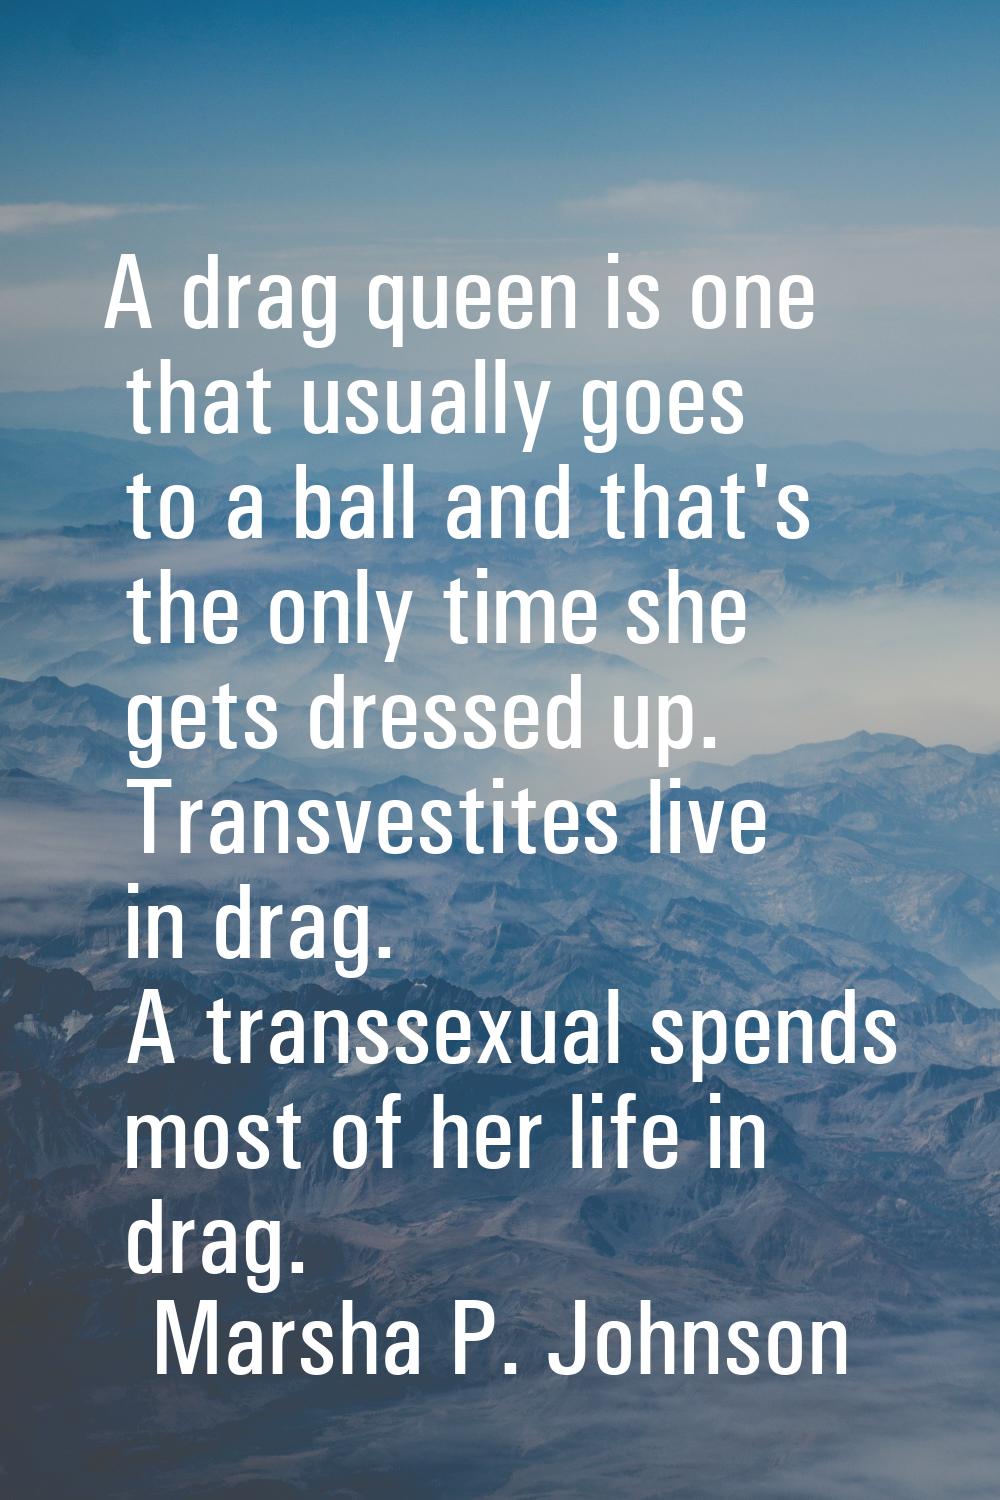 A drag queen is one that usually goes to a ball and that's the only time she gets dressed up. Trans